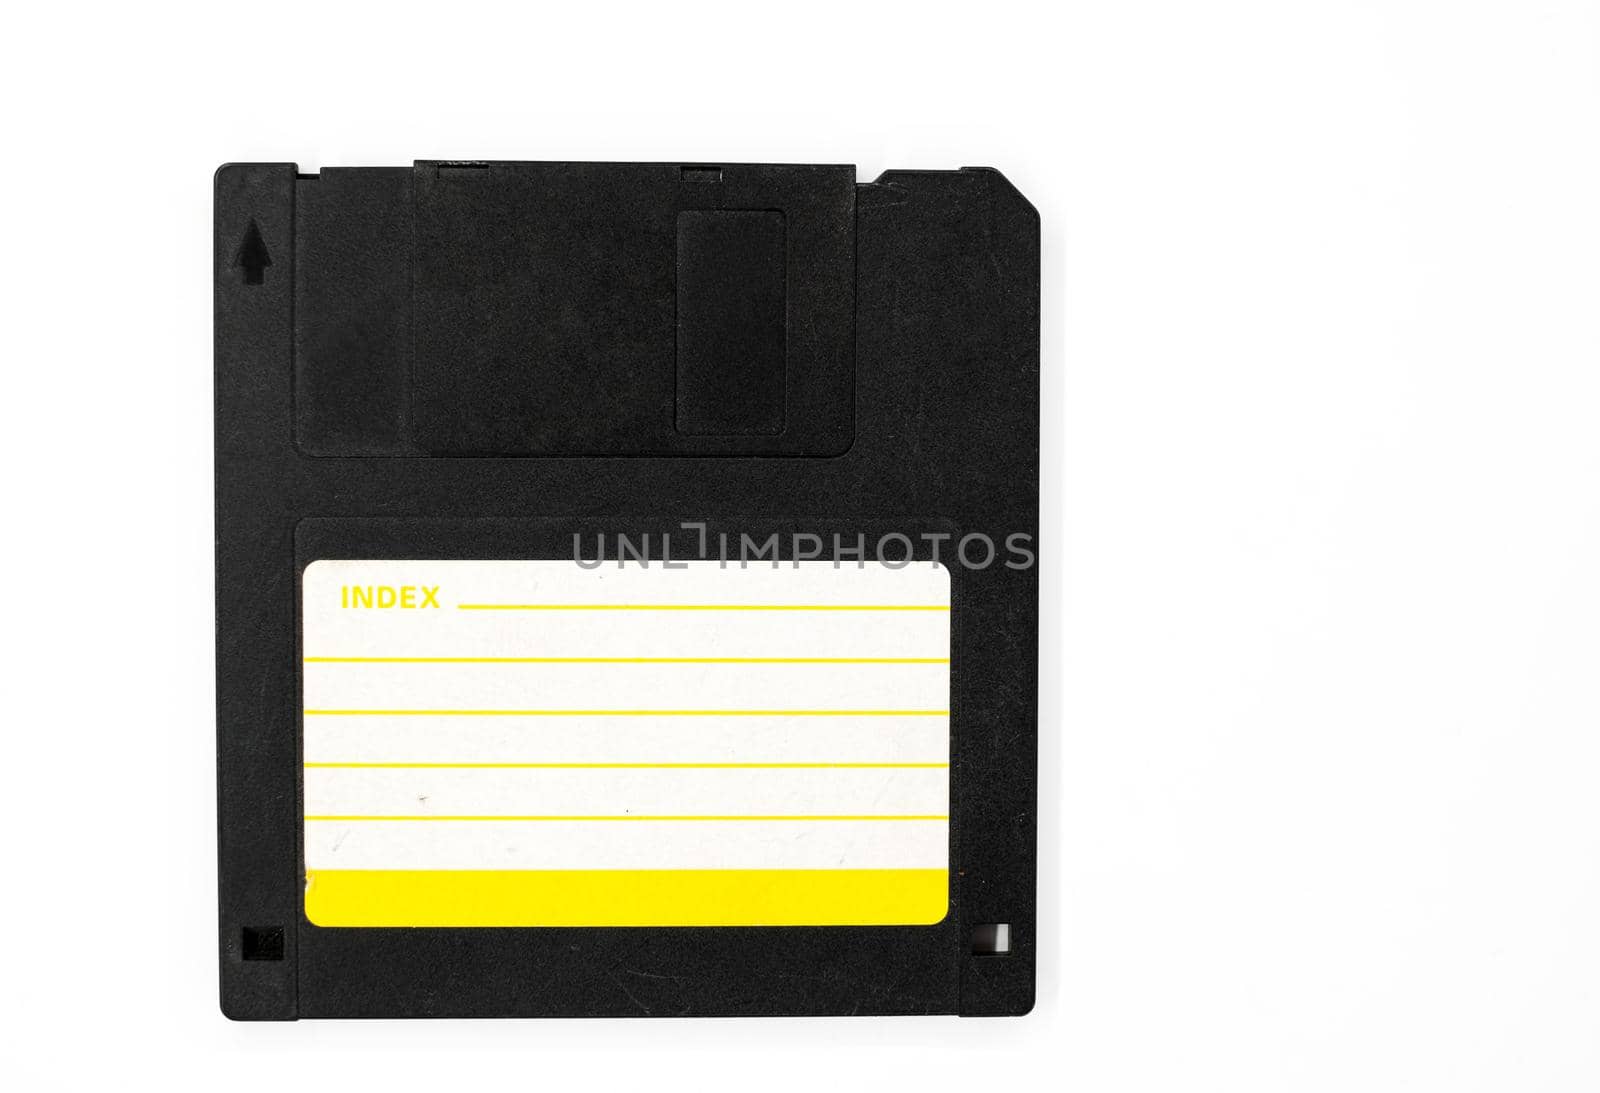 Black floppy disk with blank label on white background by Roberto